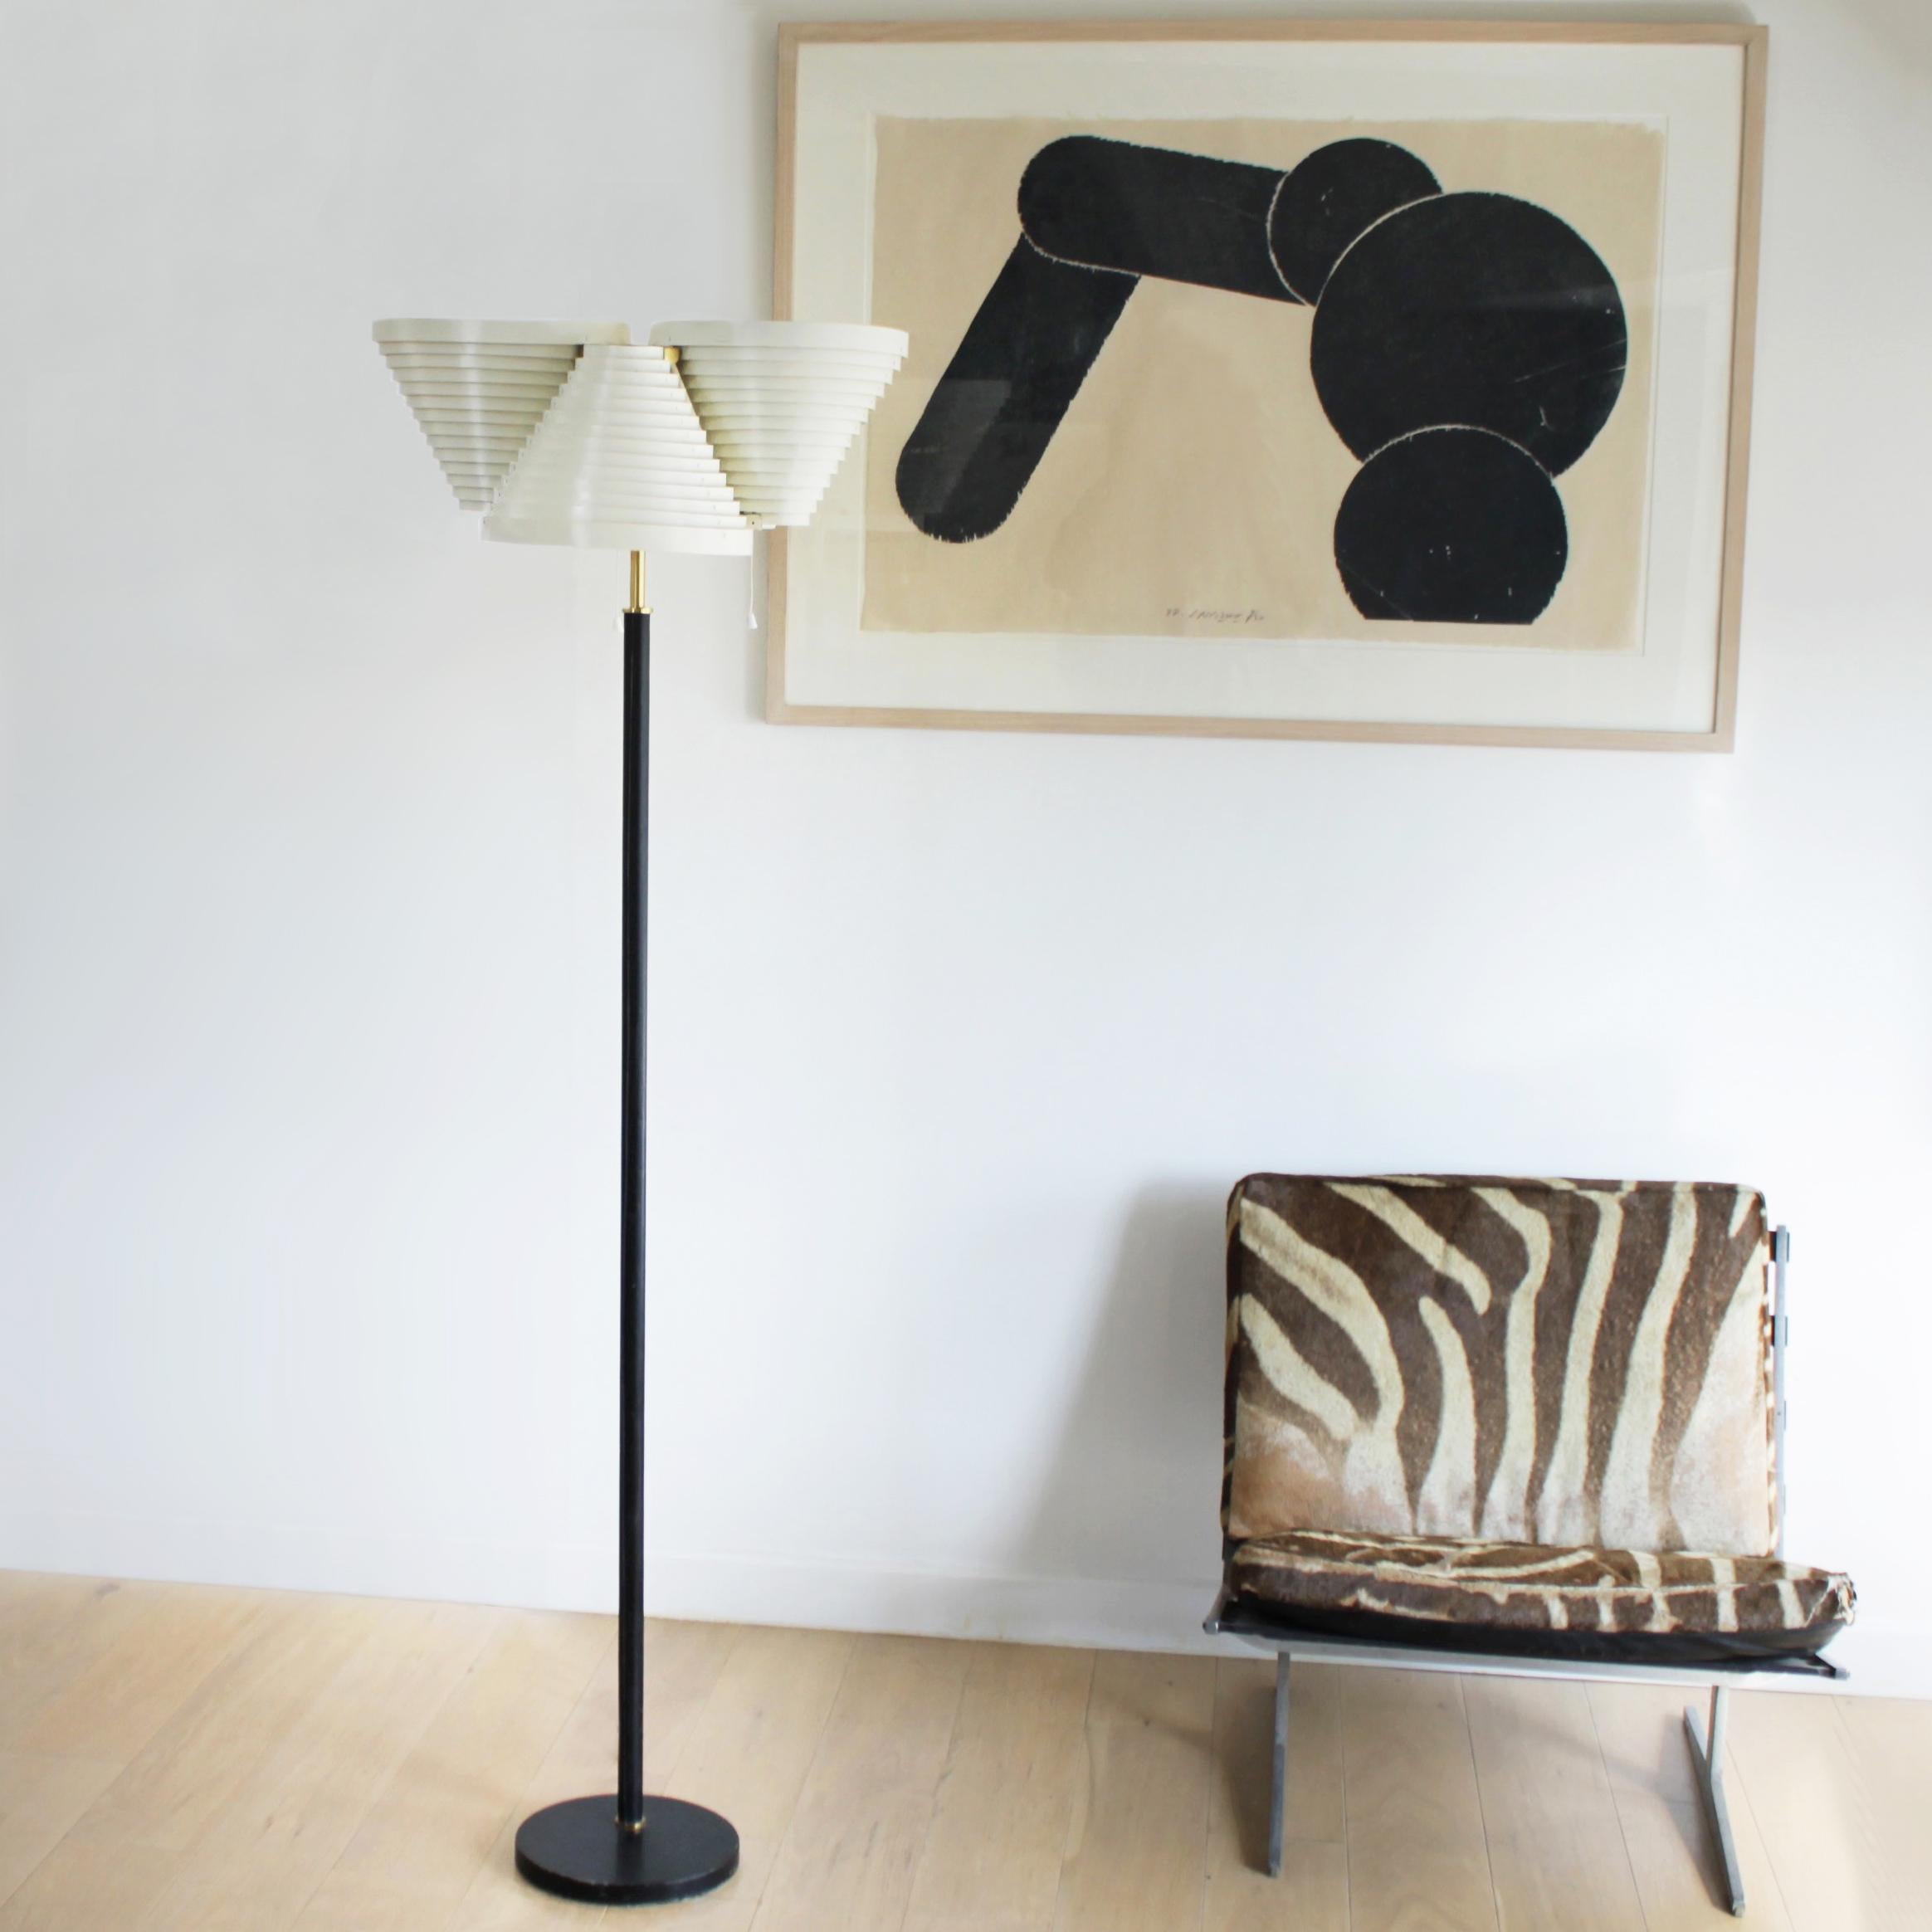 Beautiful iconic floor lamp, Model A809 by Alvar Aalto for Valaisinpaja Oy, Finland. Off-white lacquered metal shades, brass details, black leather-wrapped metal stem and base. Wire in good condition.
Measurements: Height (168 cm), width (56 cm),